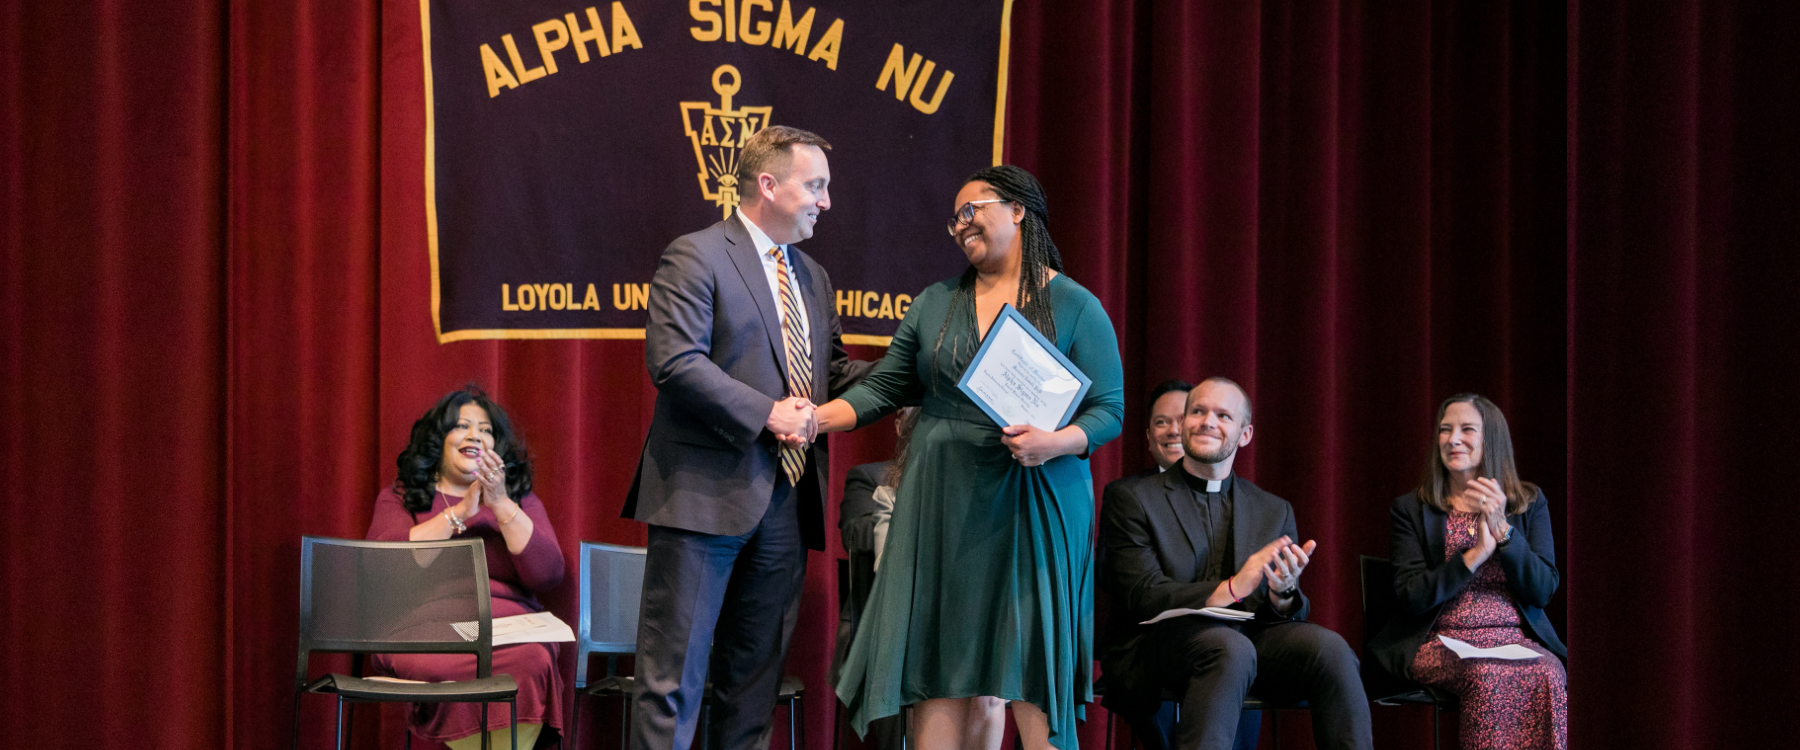 Dr. Markeda Newell, Interim Dean of the School of Education, inducted into Alpha Sigma Nu